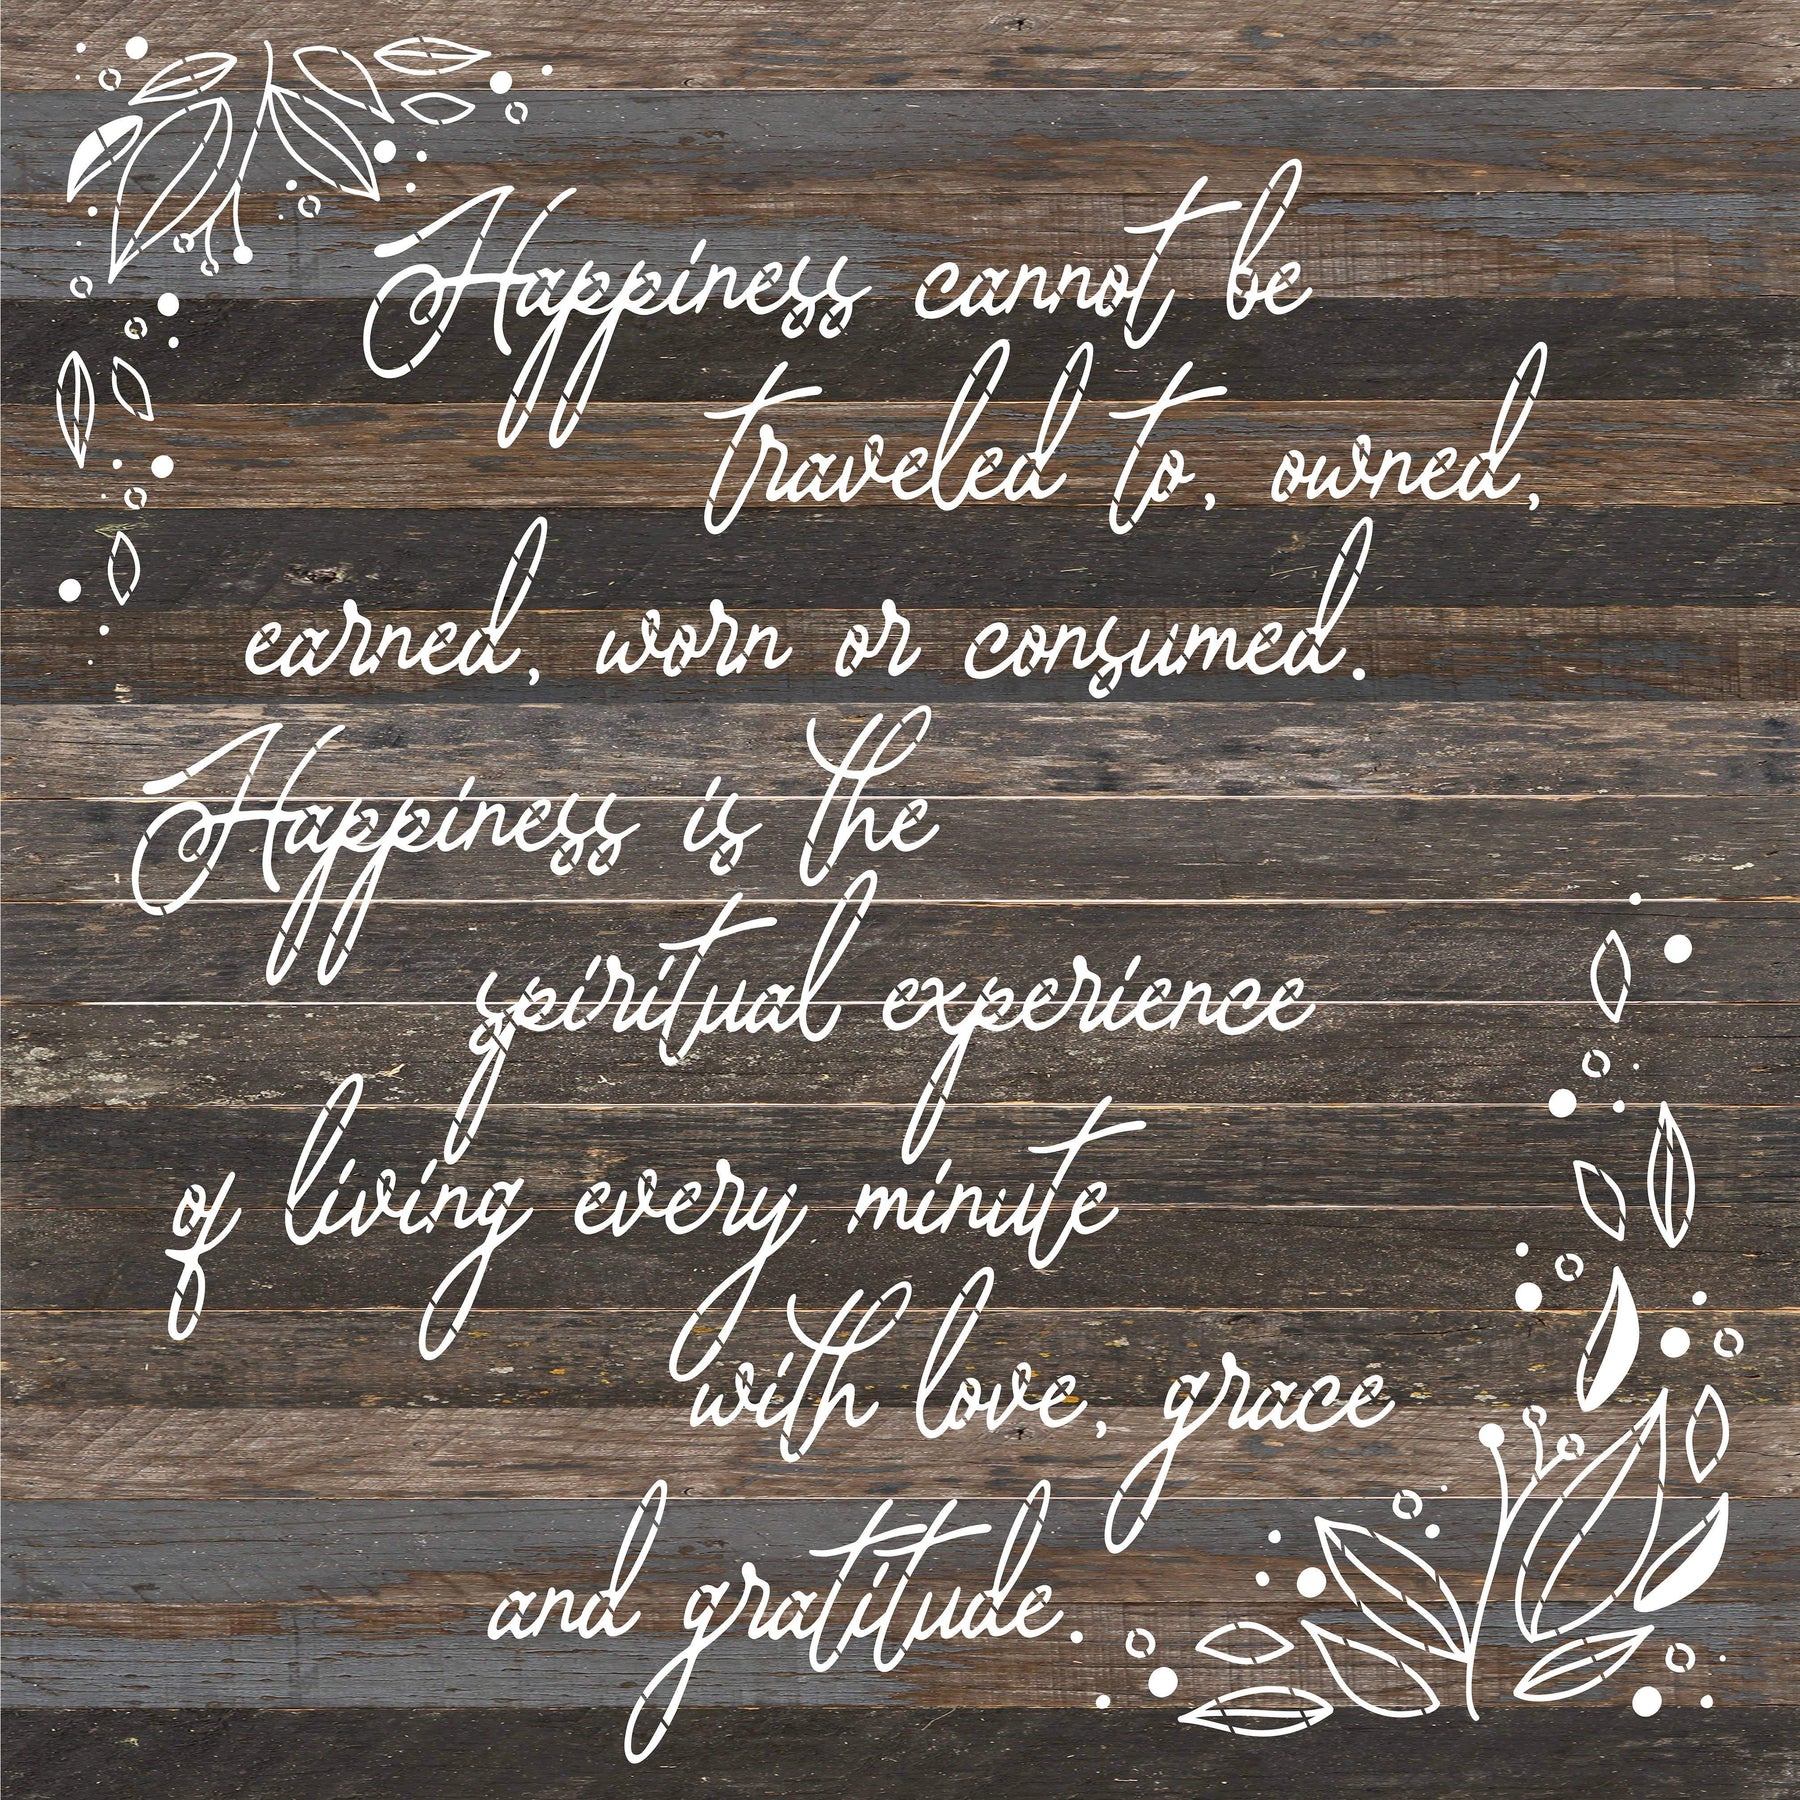 Happiness cannot be traveled to owned earned worn or consumed. Happiness is the spiritual experience of living every minute with love, grace and gratitude. / 28"X28" Reclaimed Wood Sign